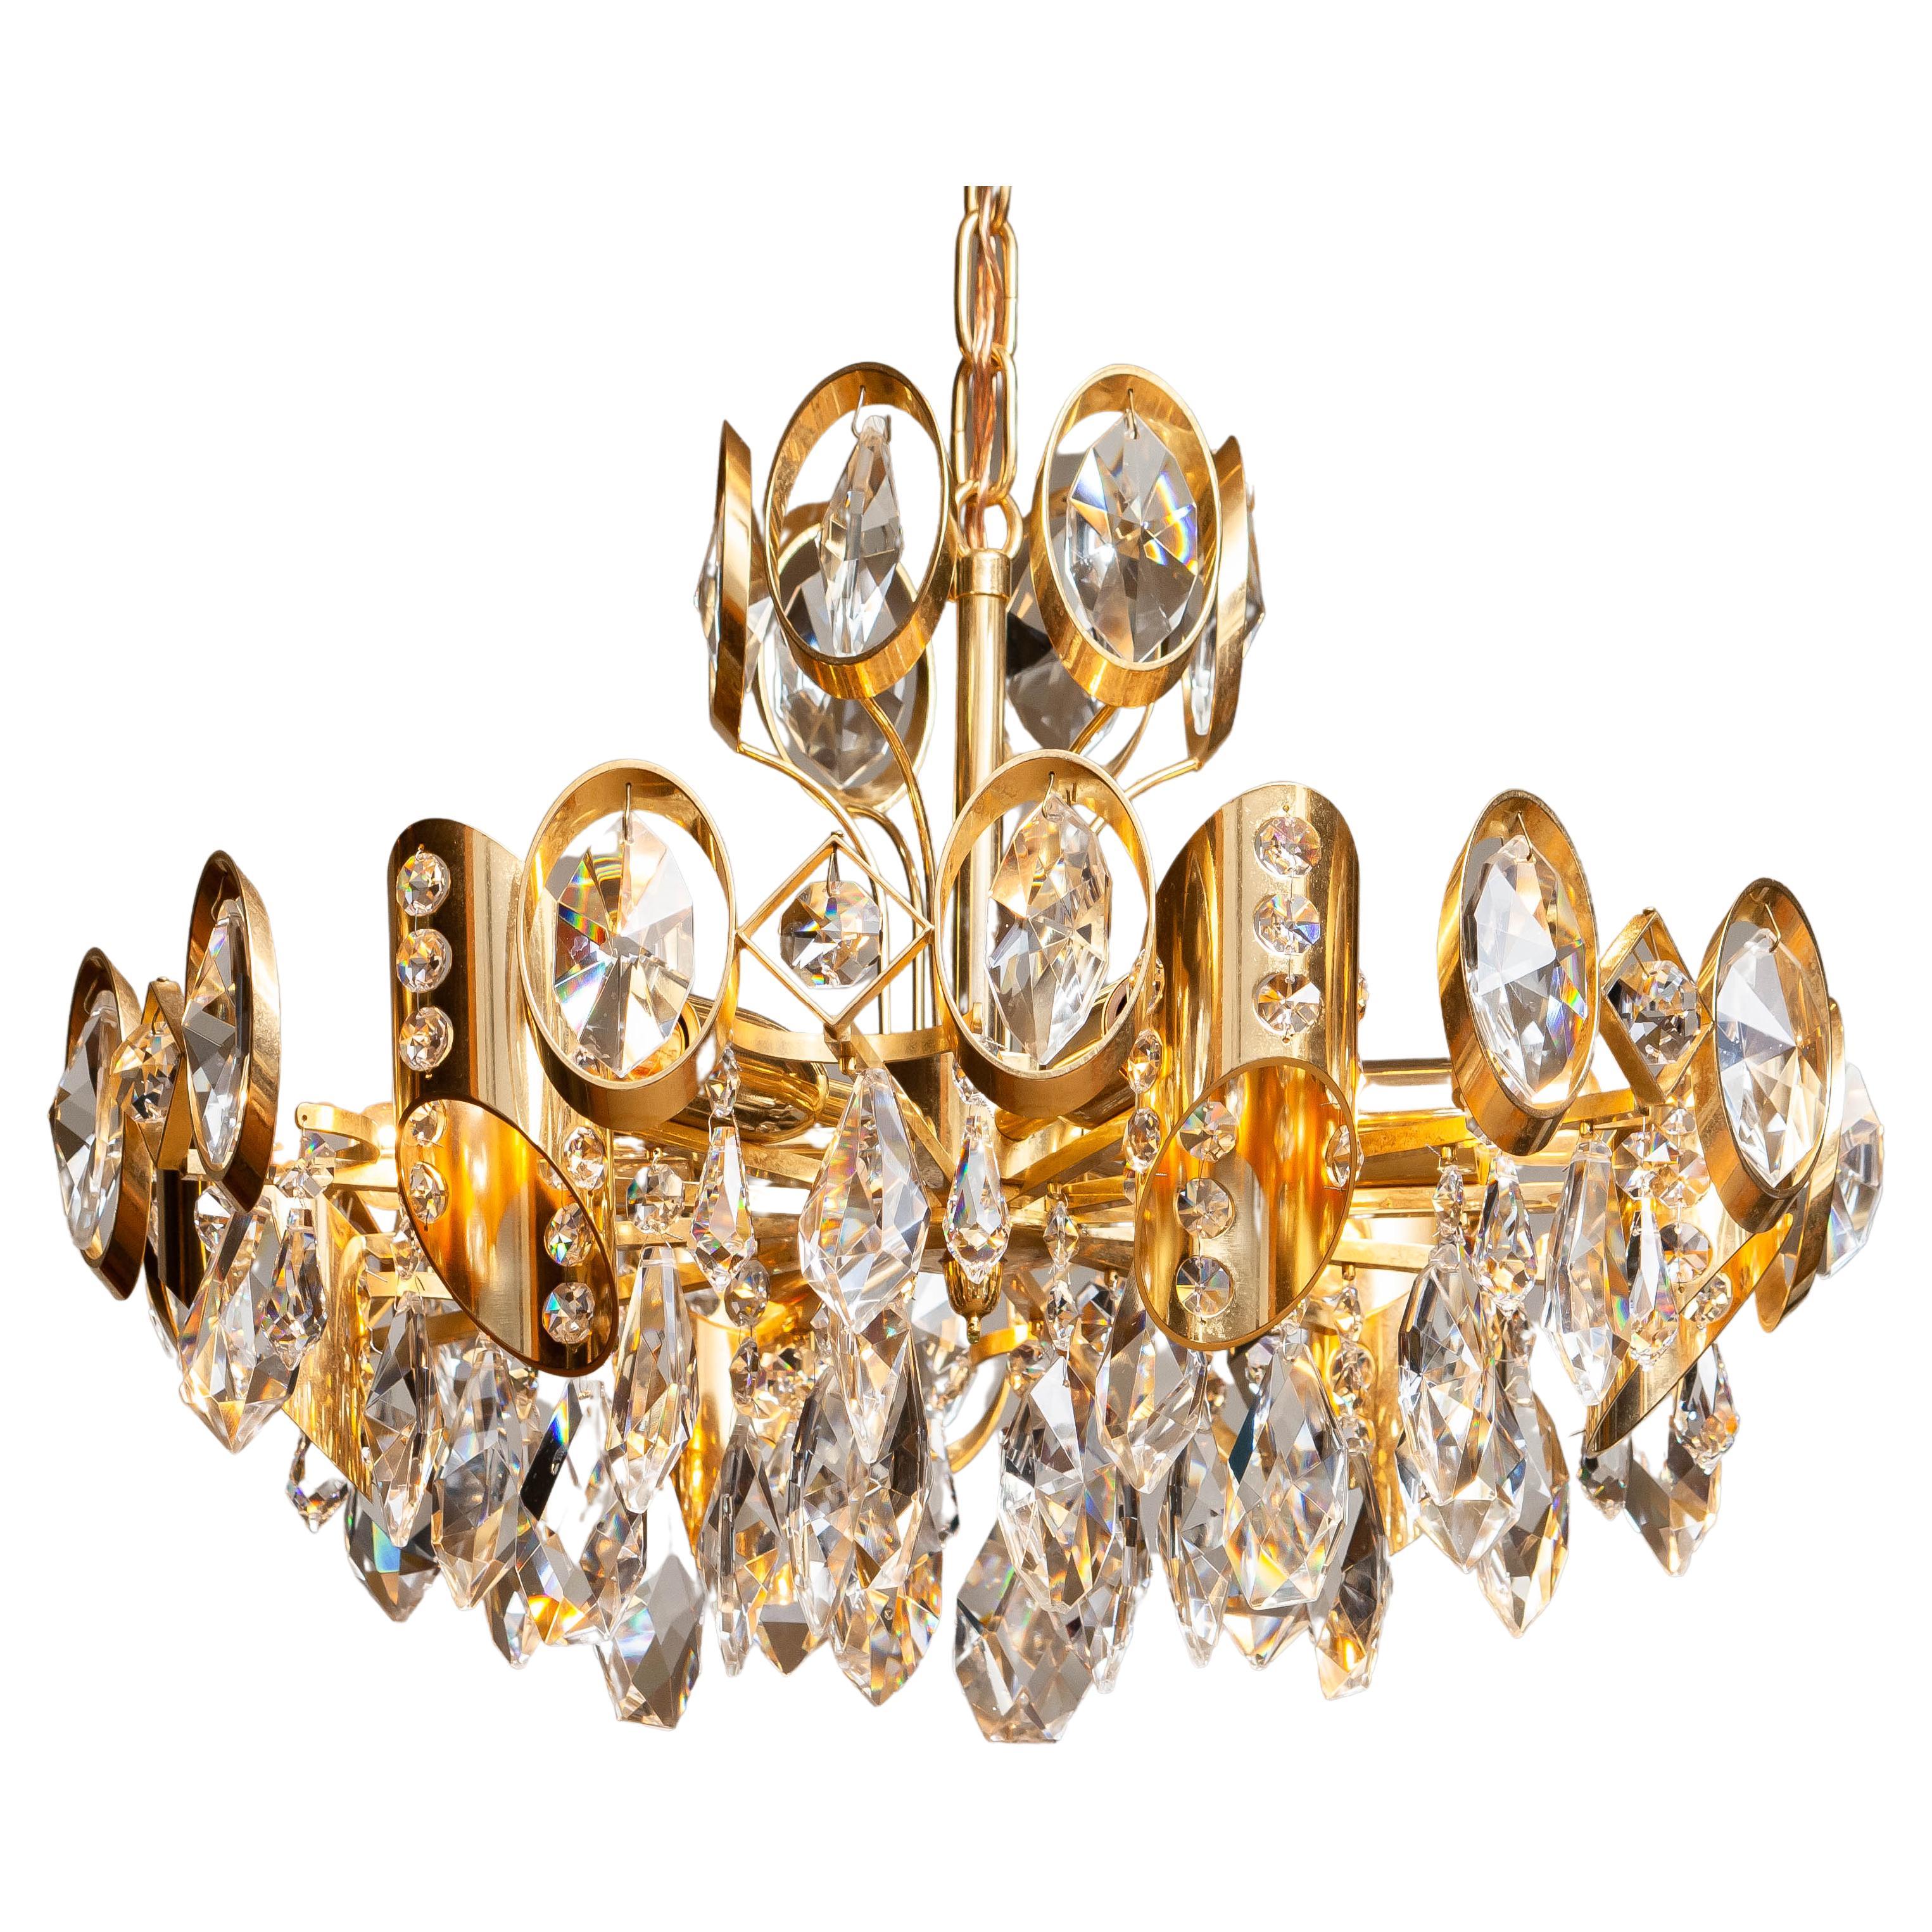 1960's Gilt Brass Filled with Large Faceted Crystals Chandelier by Ernest Palme For Sale